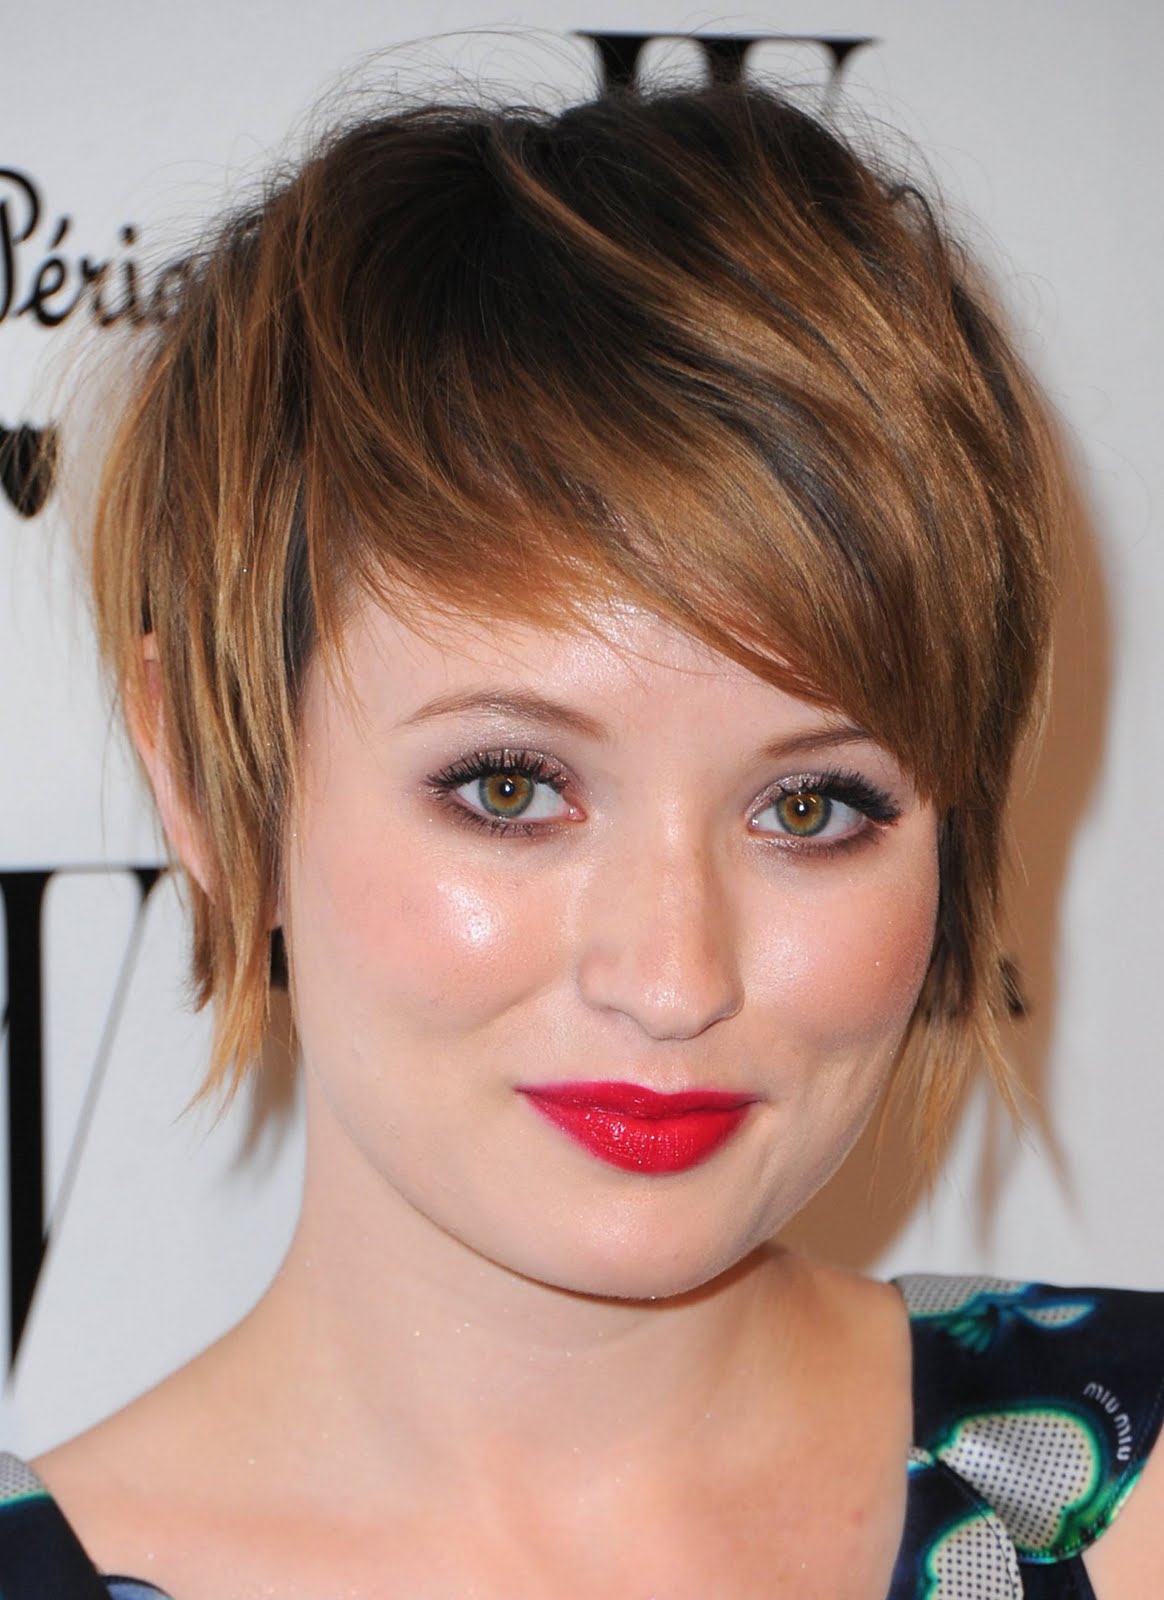 15 Cute Hairstyles for Round Faces - 15 Short